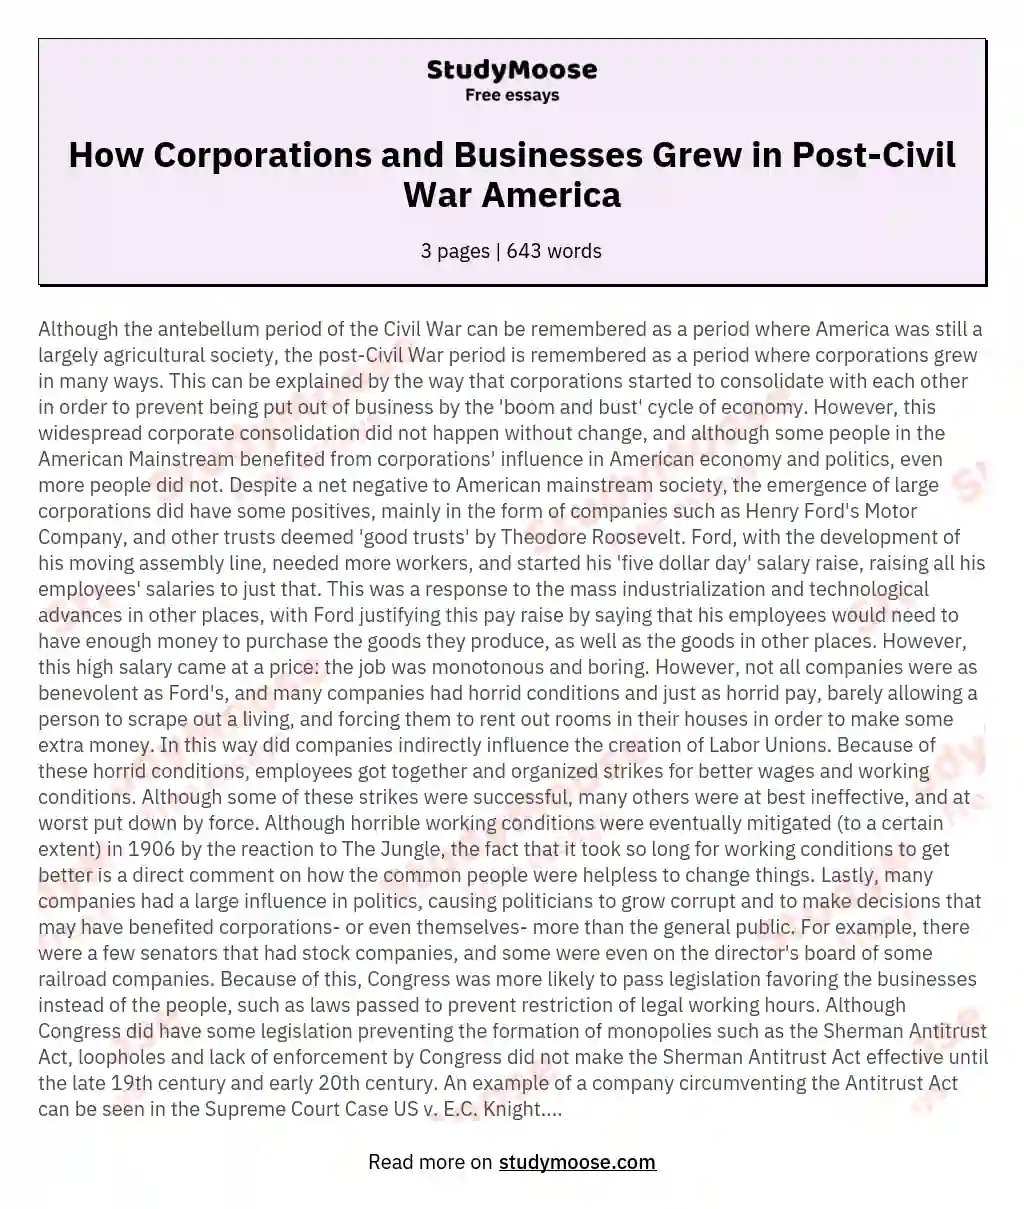 How Corporations and Businesses Grew in Post-Civil War America essay